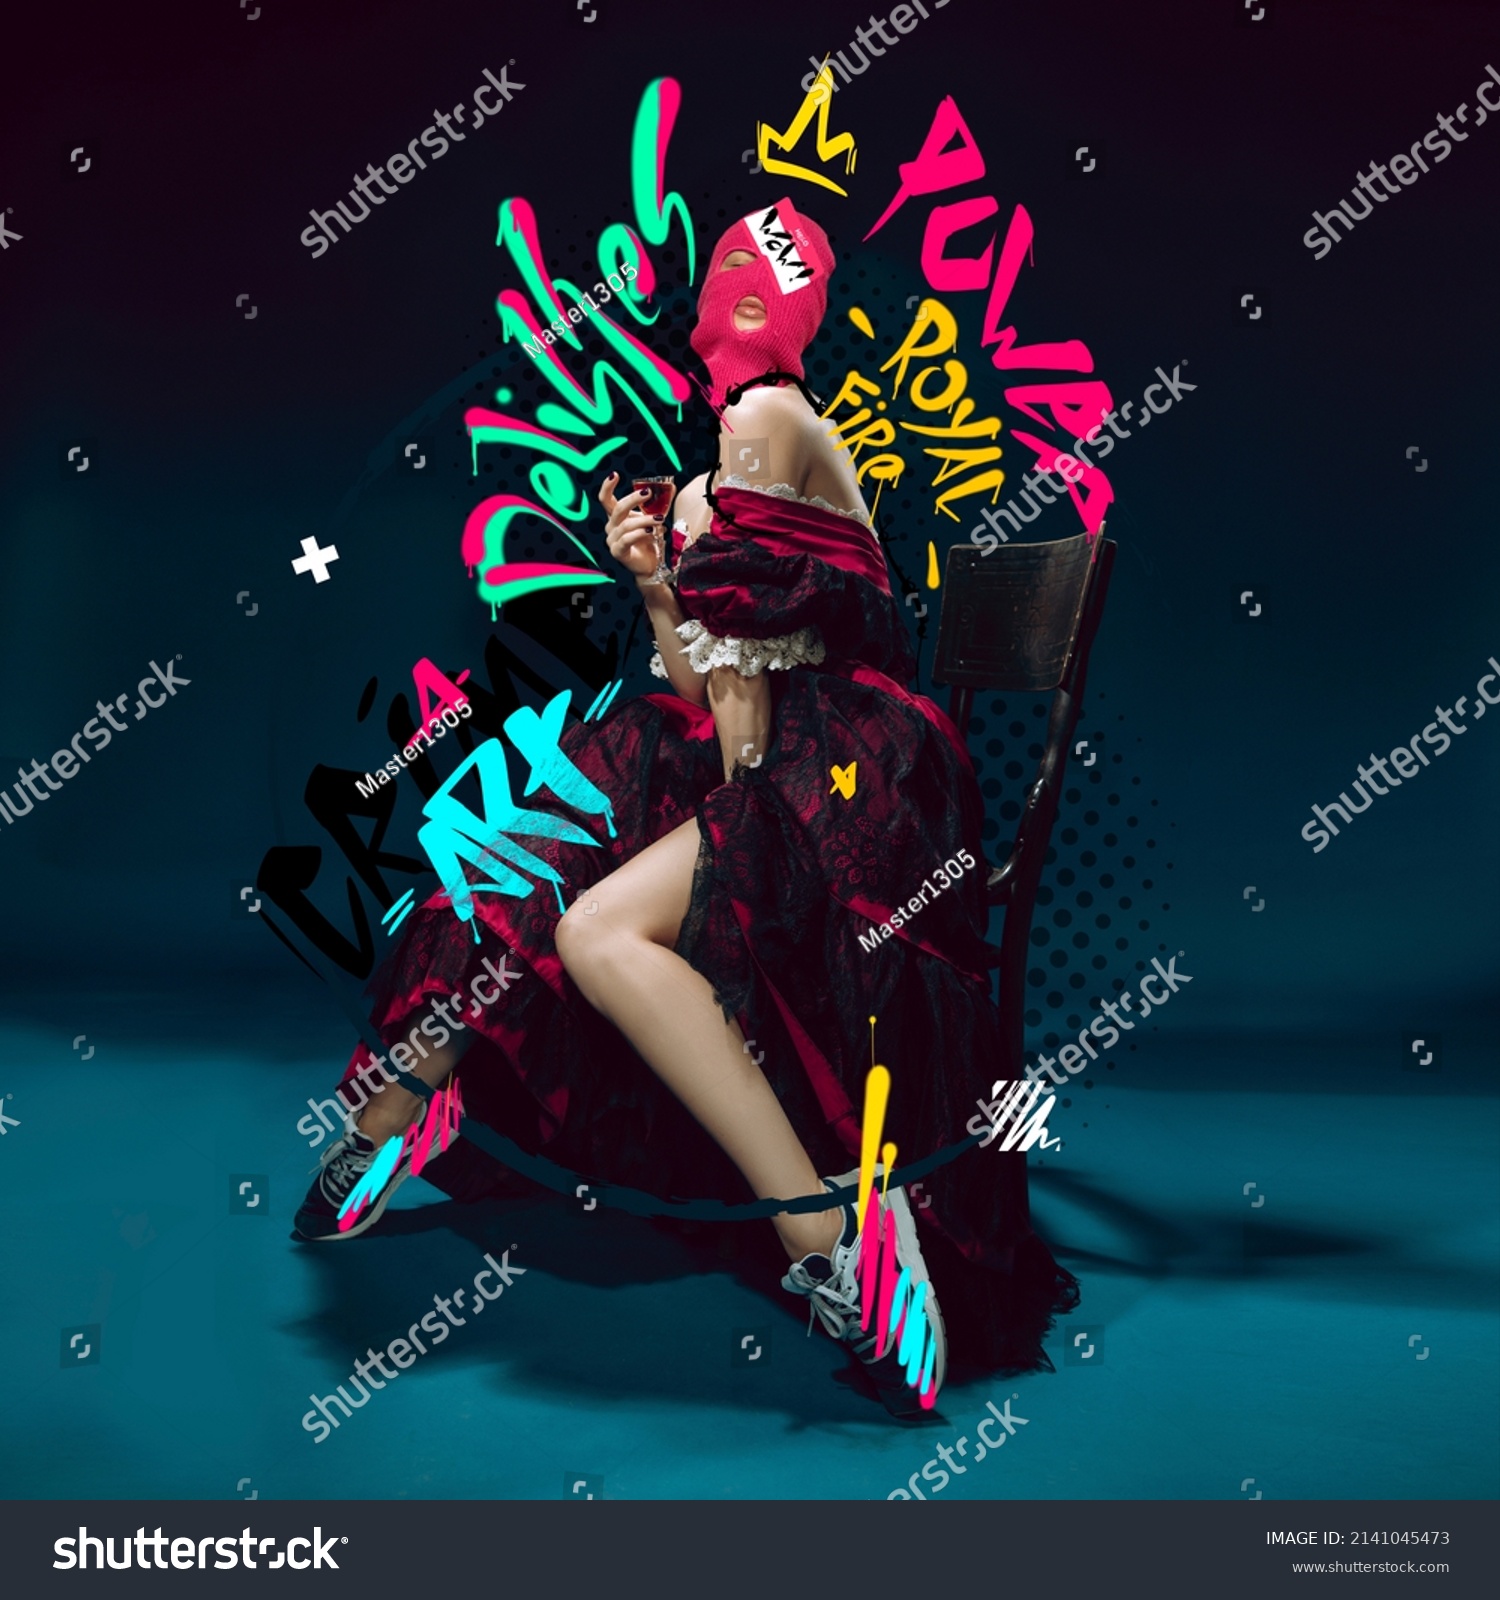 Contemporary artwork. Medieval royal woman, princess in renaissance dress, modern sneakers and balaclava isolated over dark background. Combination of modernity and past. Street style lettering design #2141045473